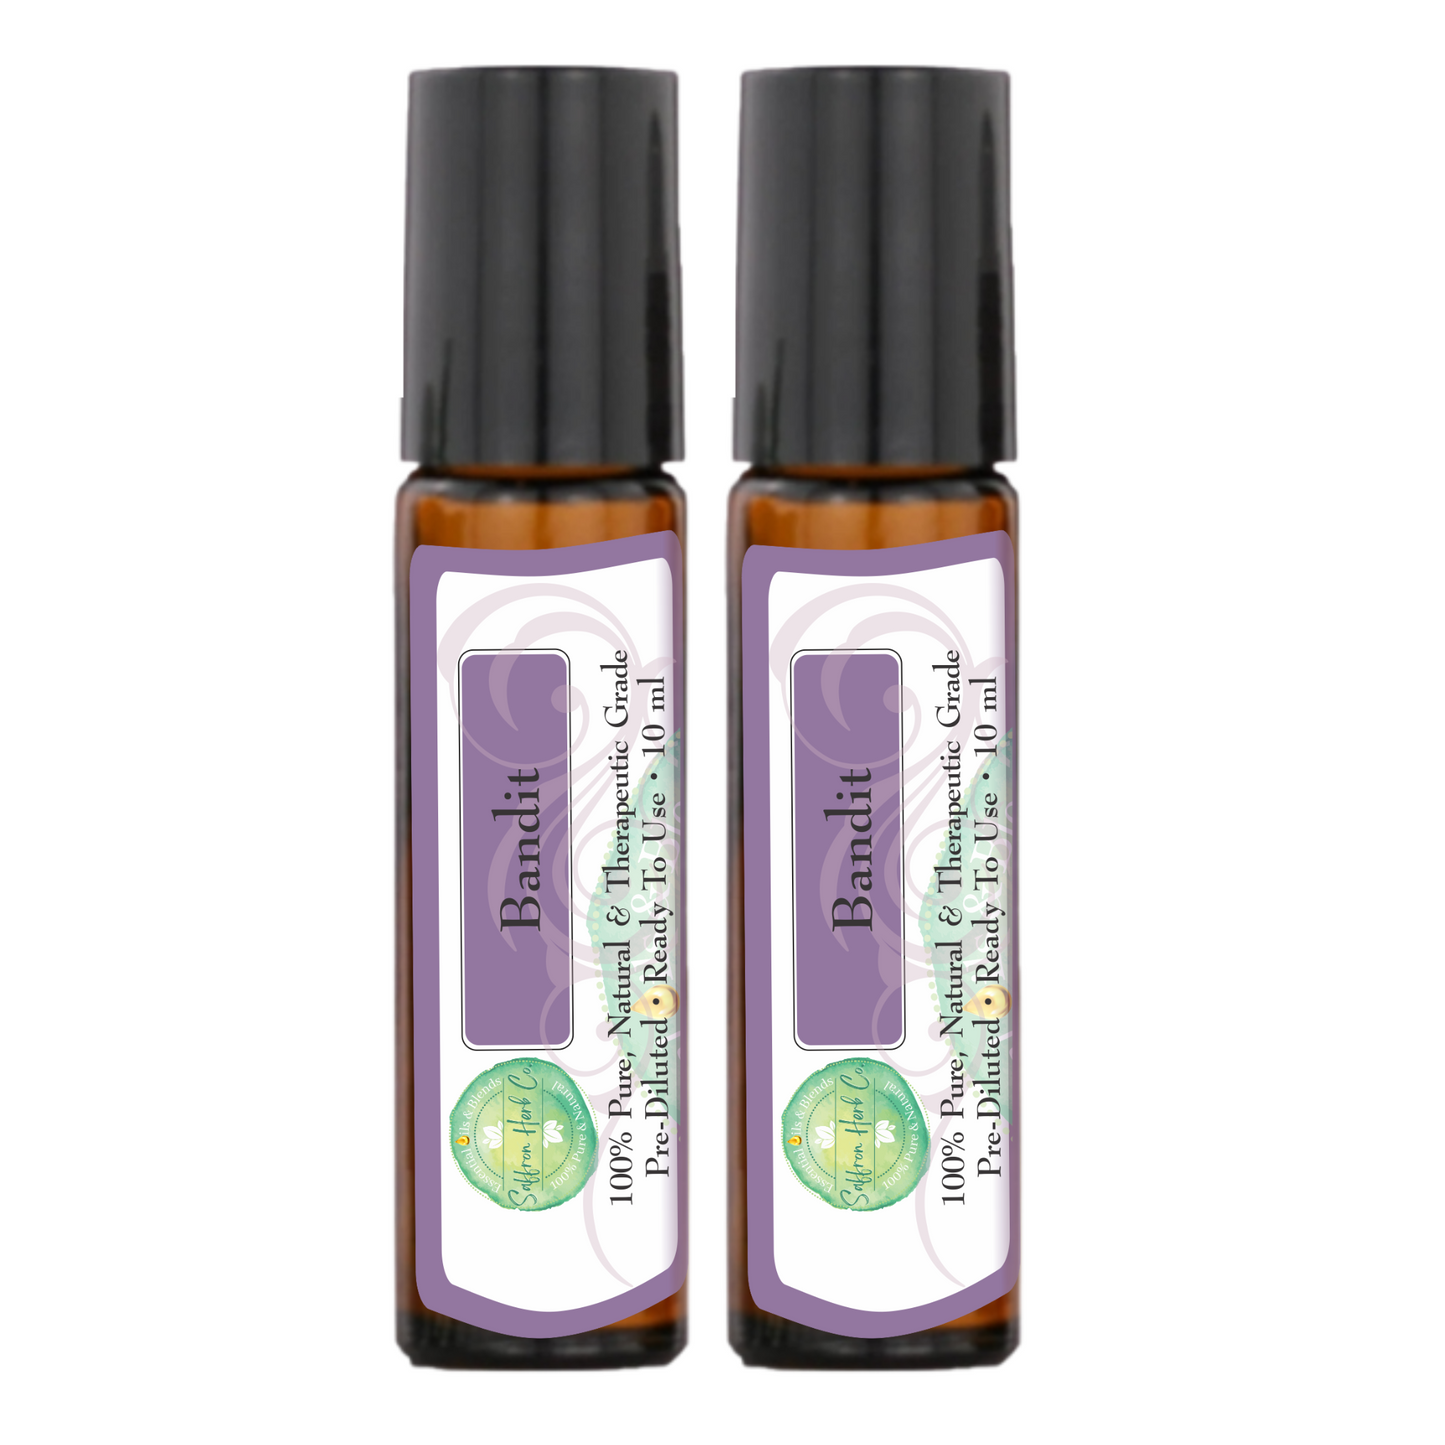 Bandit™ Essential Oil Roller Bottle Blend • 100% Pure & Natural • Pre-Diluted • Ready To Use